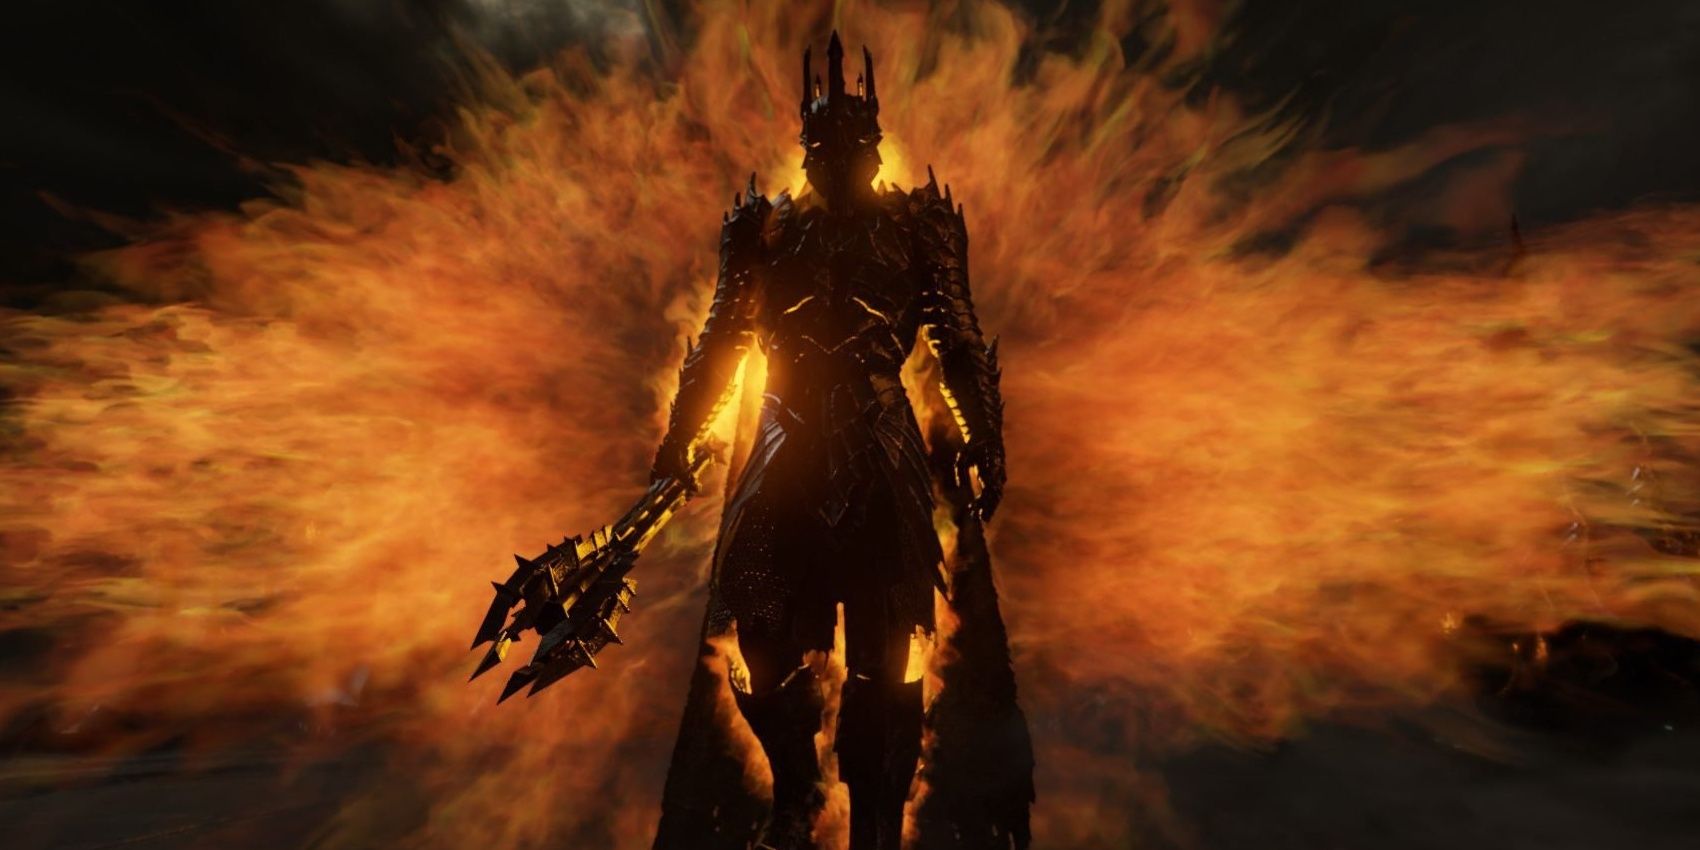 Sauron Necromancer before a fiery eye in The Lord of the Rings